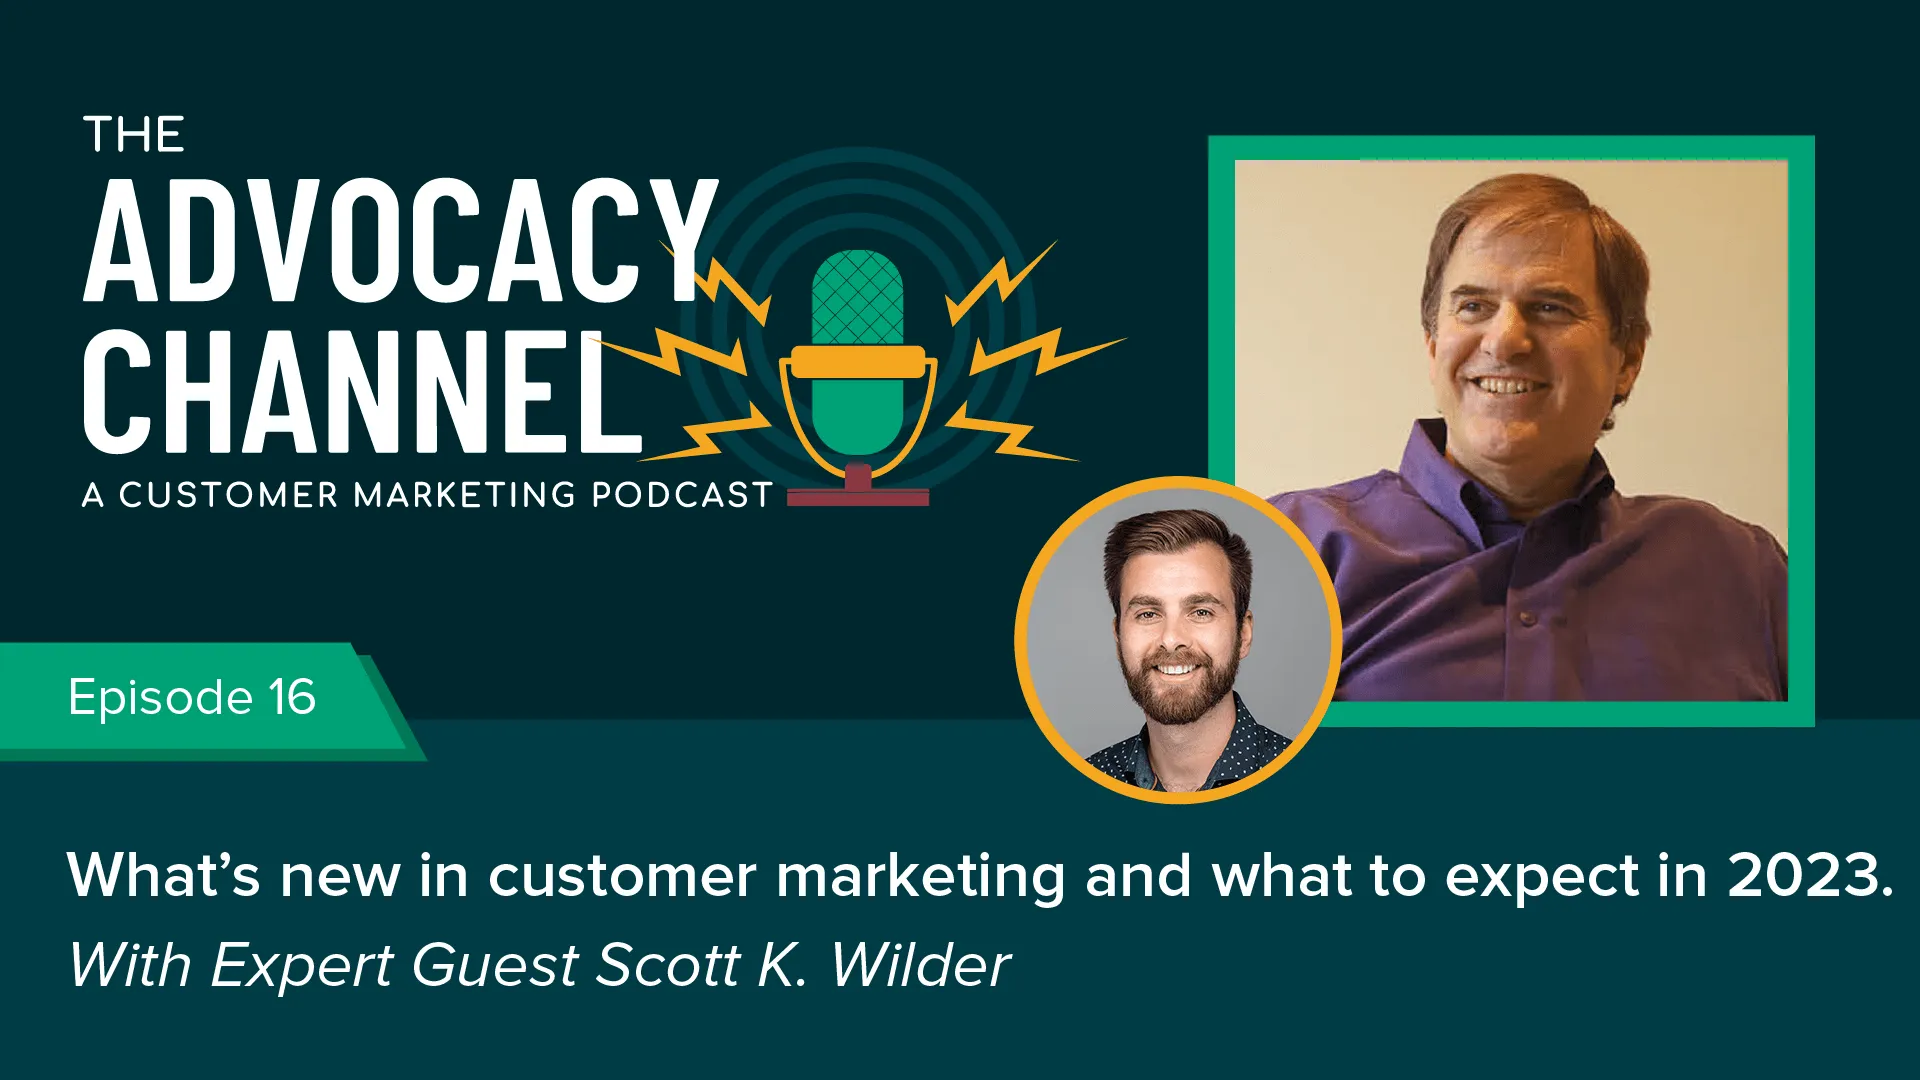 Scott K Wilder joins Will Fraser on The Advocacy Channel Podcast to discuss what's happening in customer marketing and what to expect in 2023